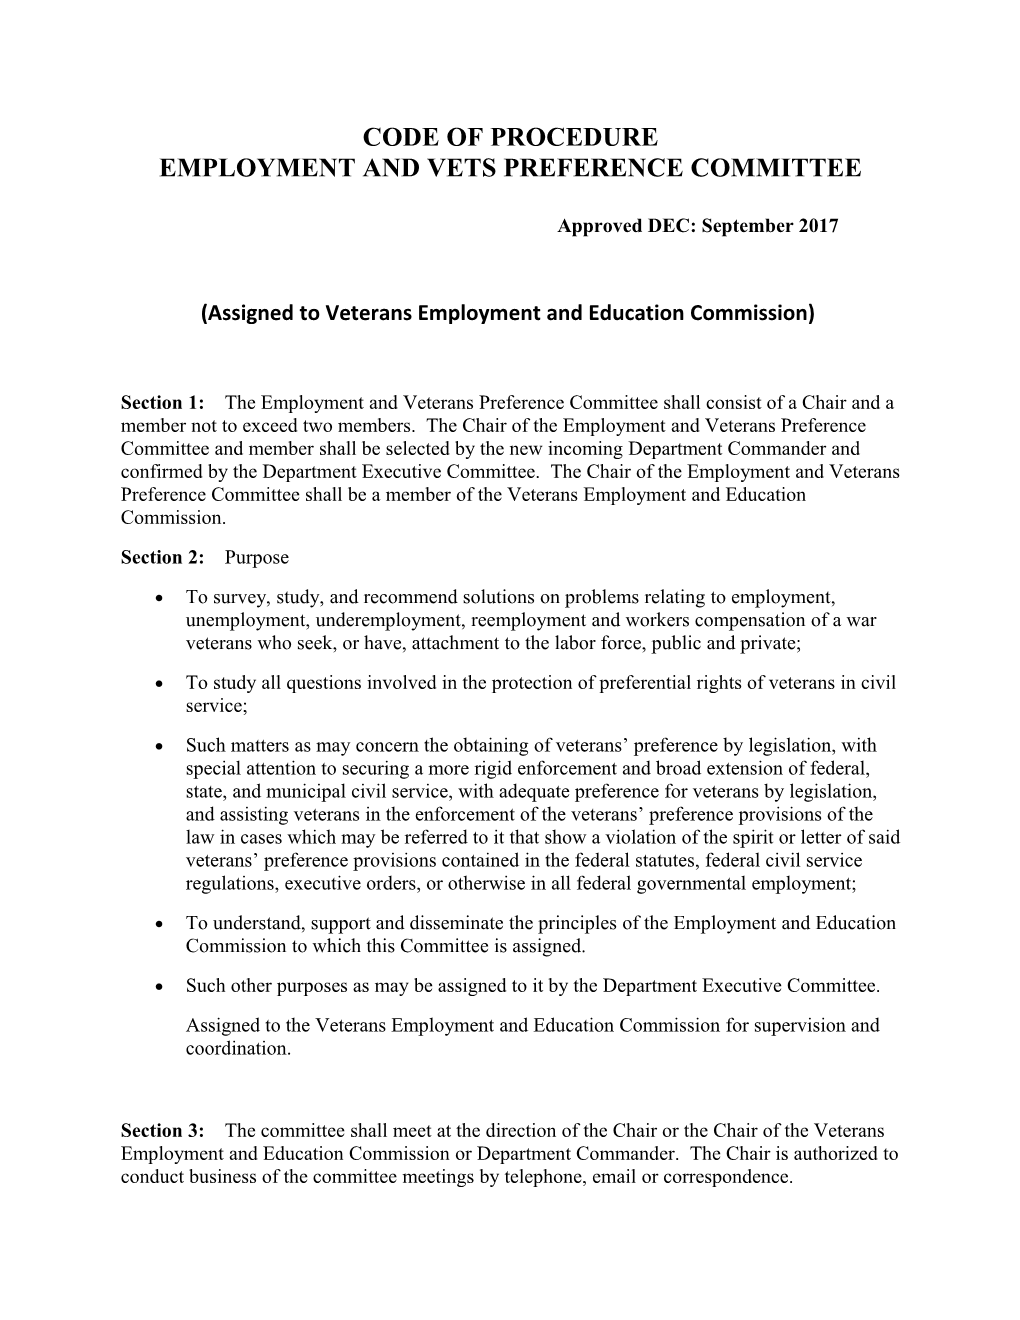 Employment and Vets Preference Committee